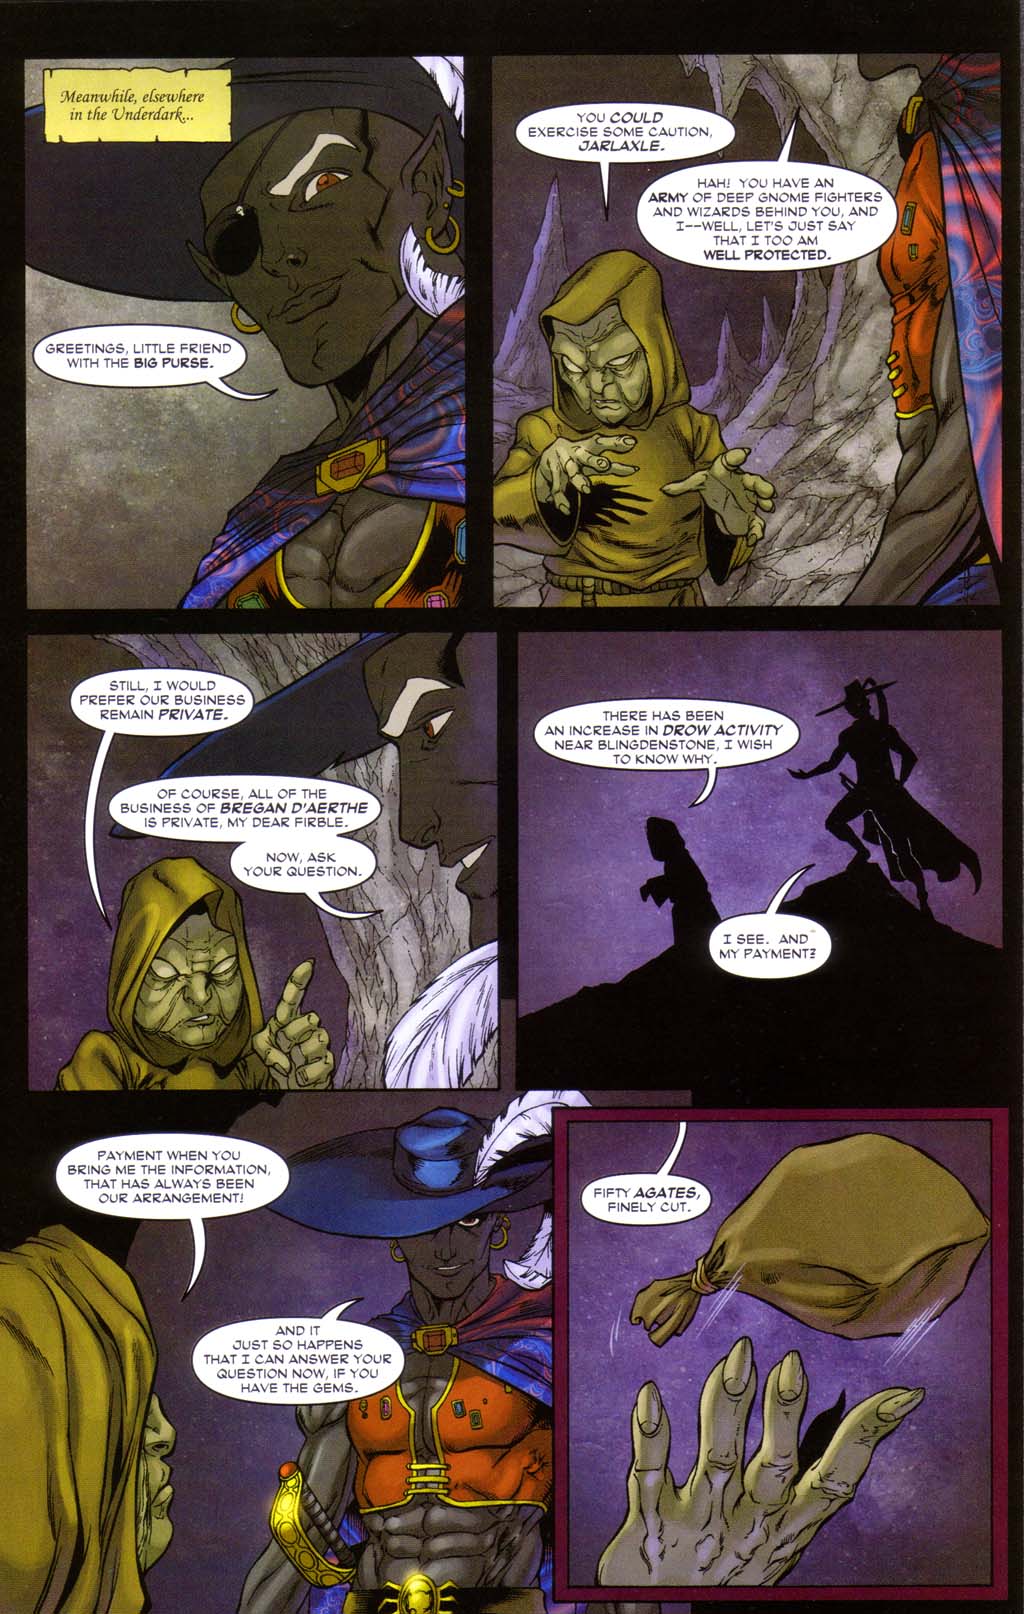 Forgotten Realms: Exile #2 - Issue #2, Part 1